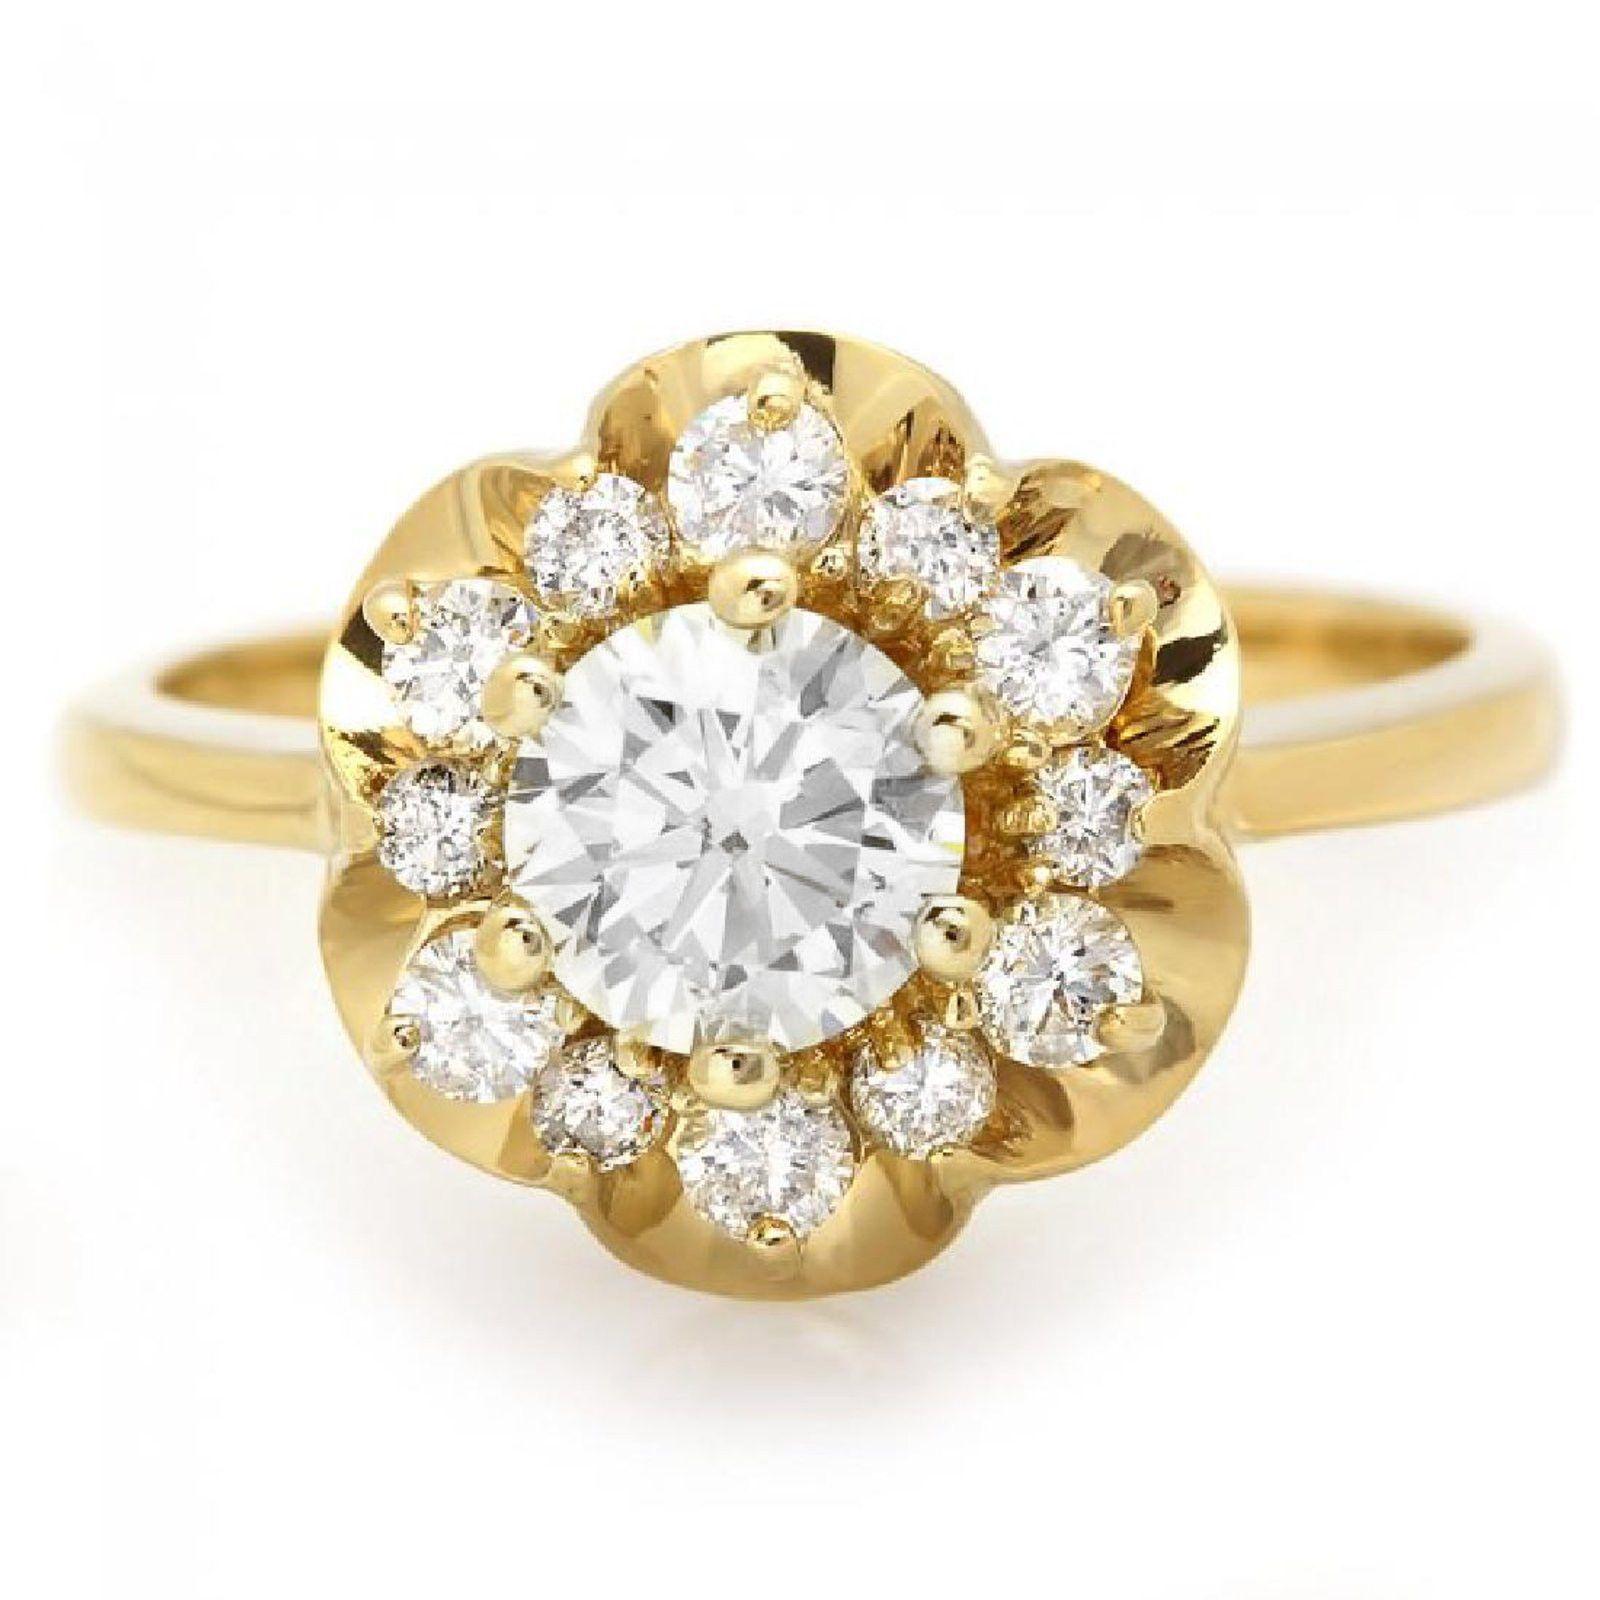 Splendid 1.15 Carat Natural Diamond 14 Karat Solid Yellow Gold Ring In New Condition For Sale In Los Angeles, CA